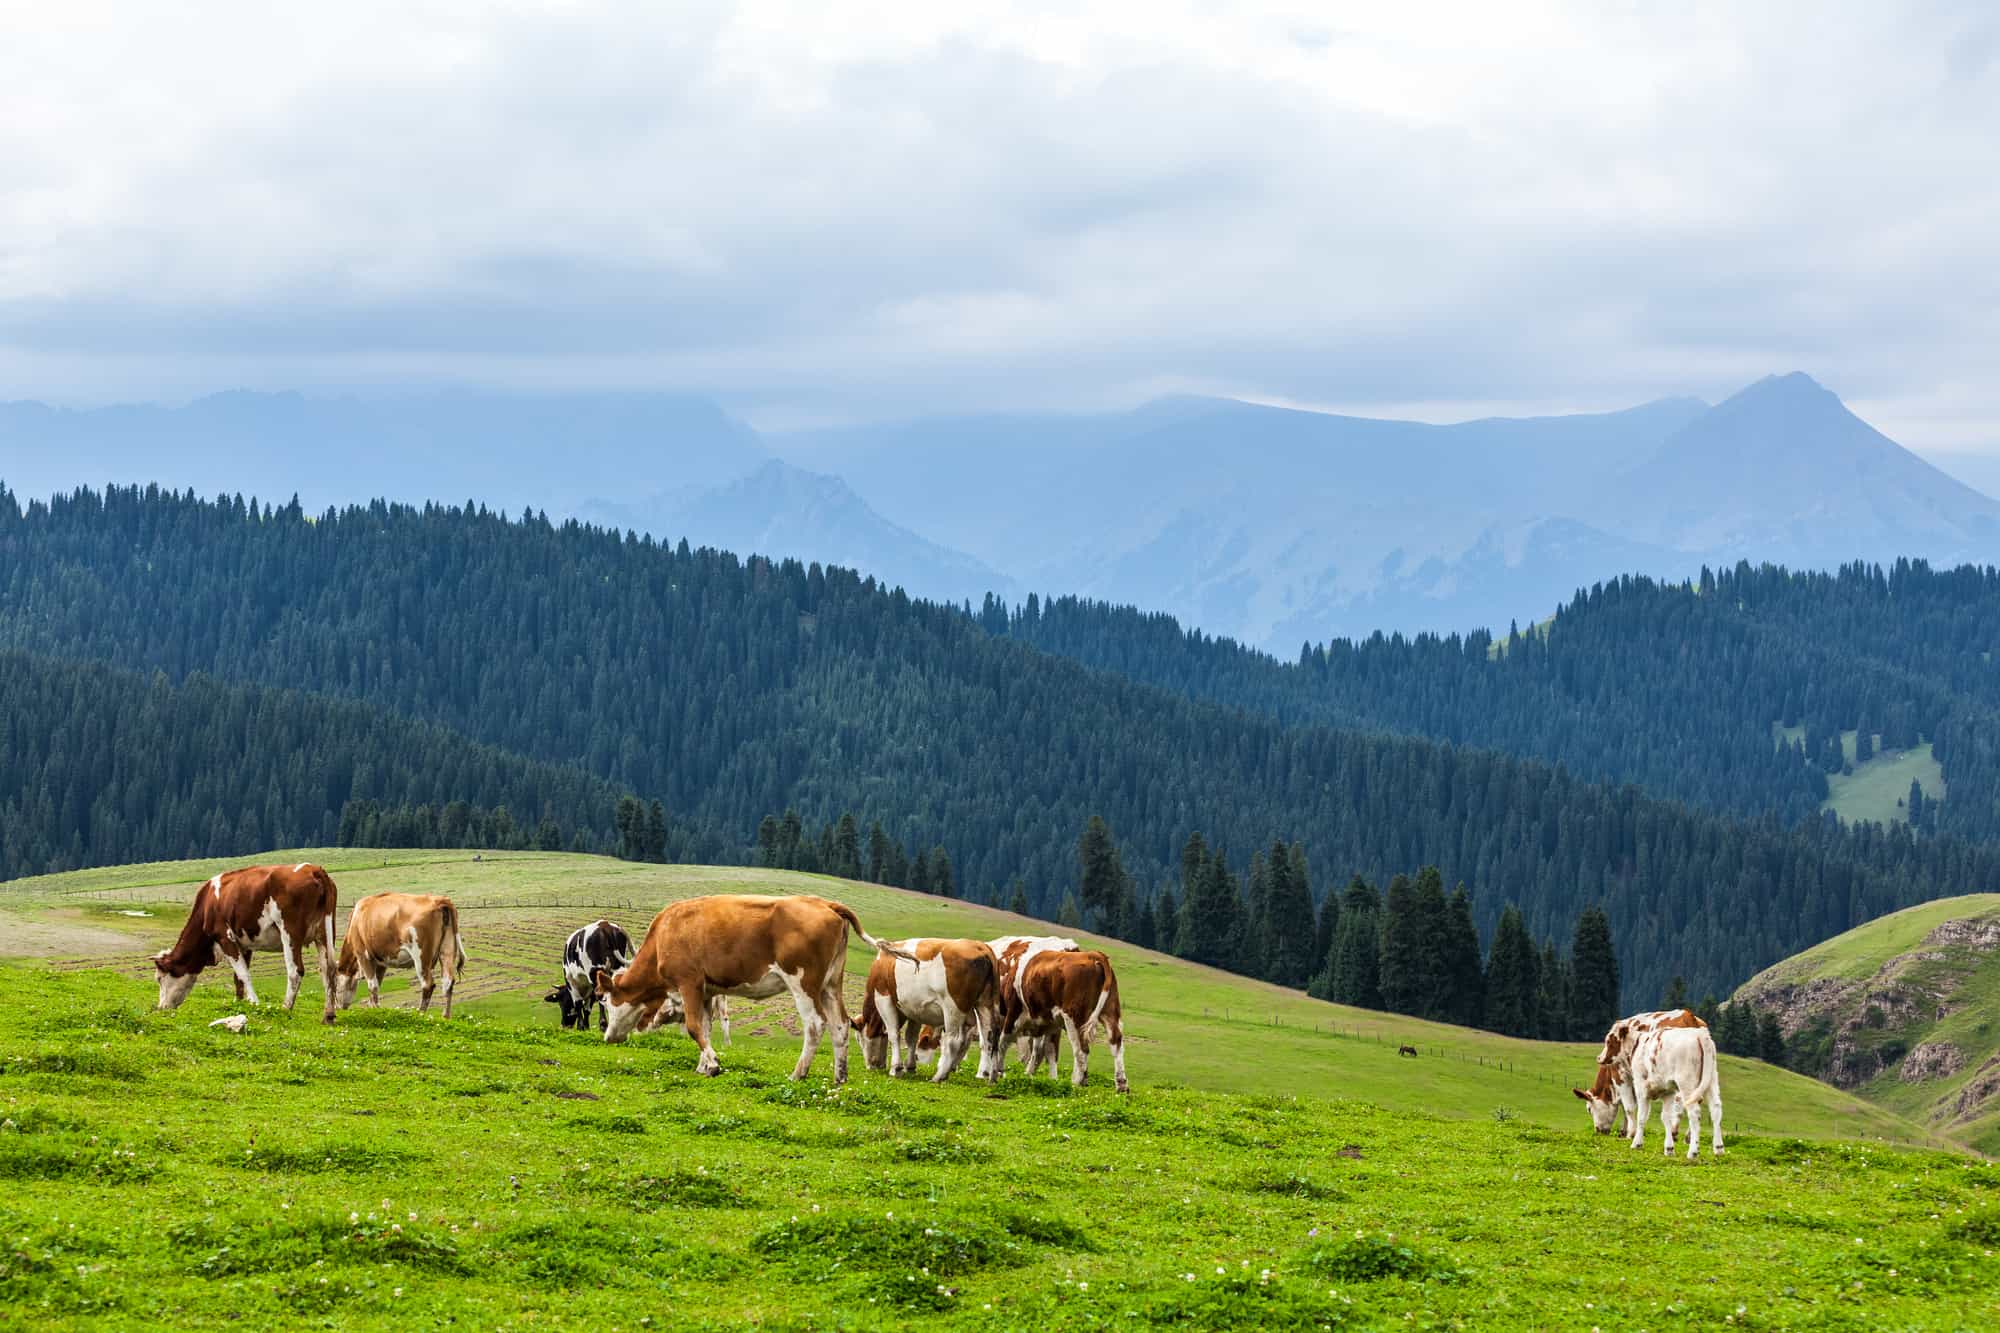 Cows grazing on a green pasture against mountains